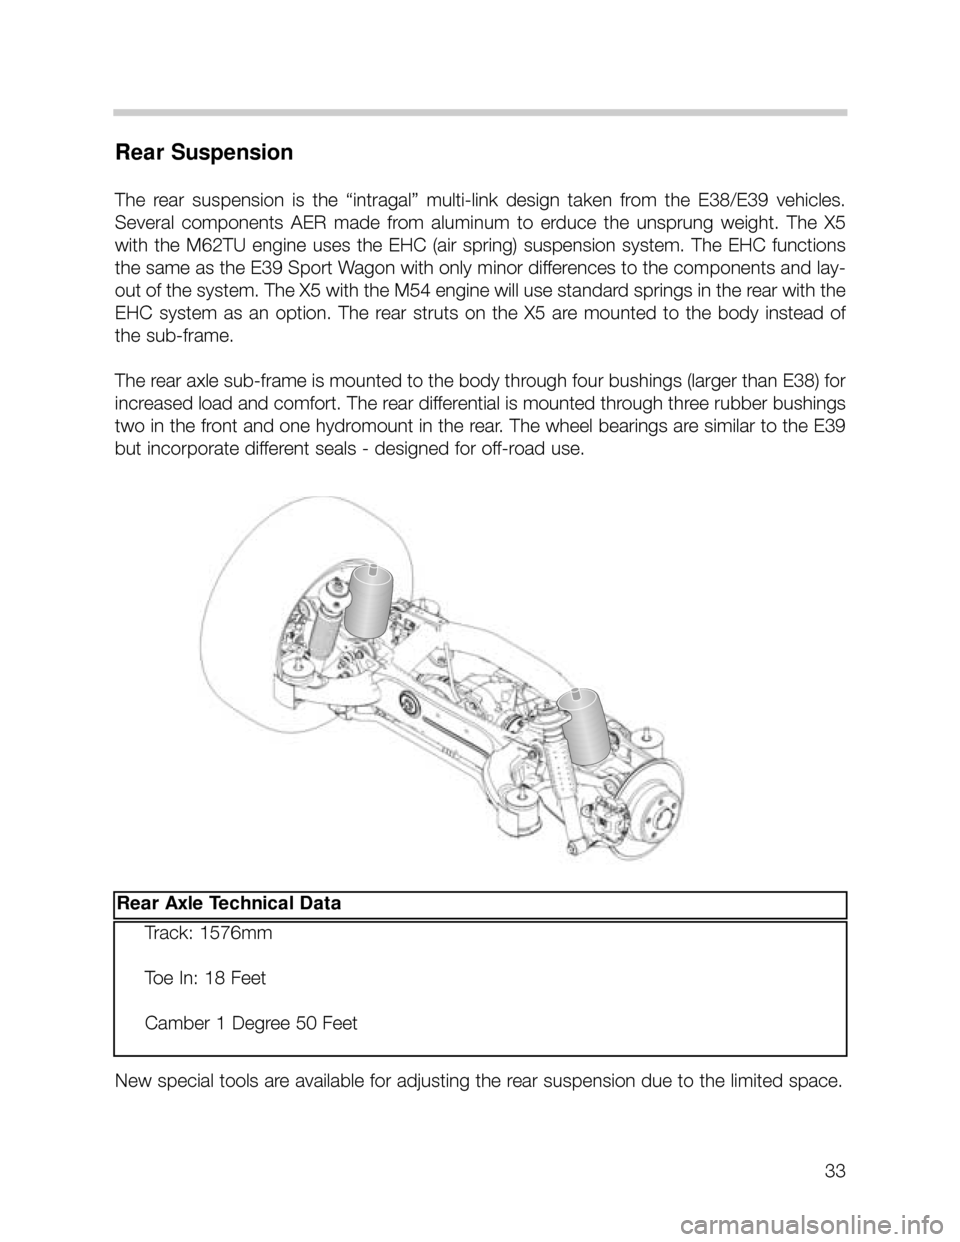 BMW X5 2006 E53 Workshop Manual 33
Rear Suspension
The  rear  suspension  is  the  “intragal”  multi-link  design  taken  from  the  E38/E39  vehicles.
Several  components  AER  made  from  aluminum  to  erduce  the  unsprung  w